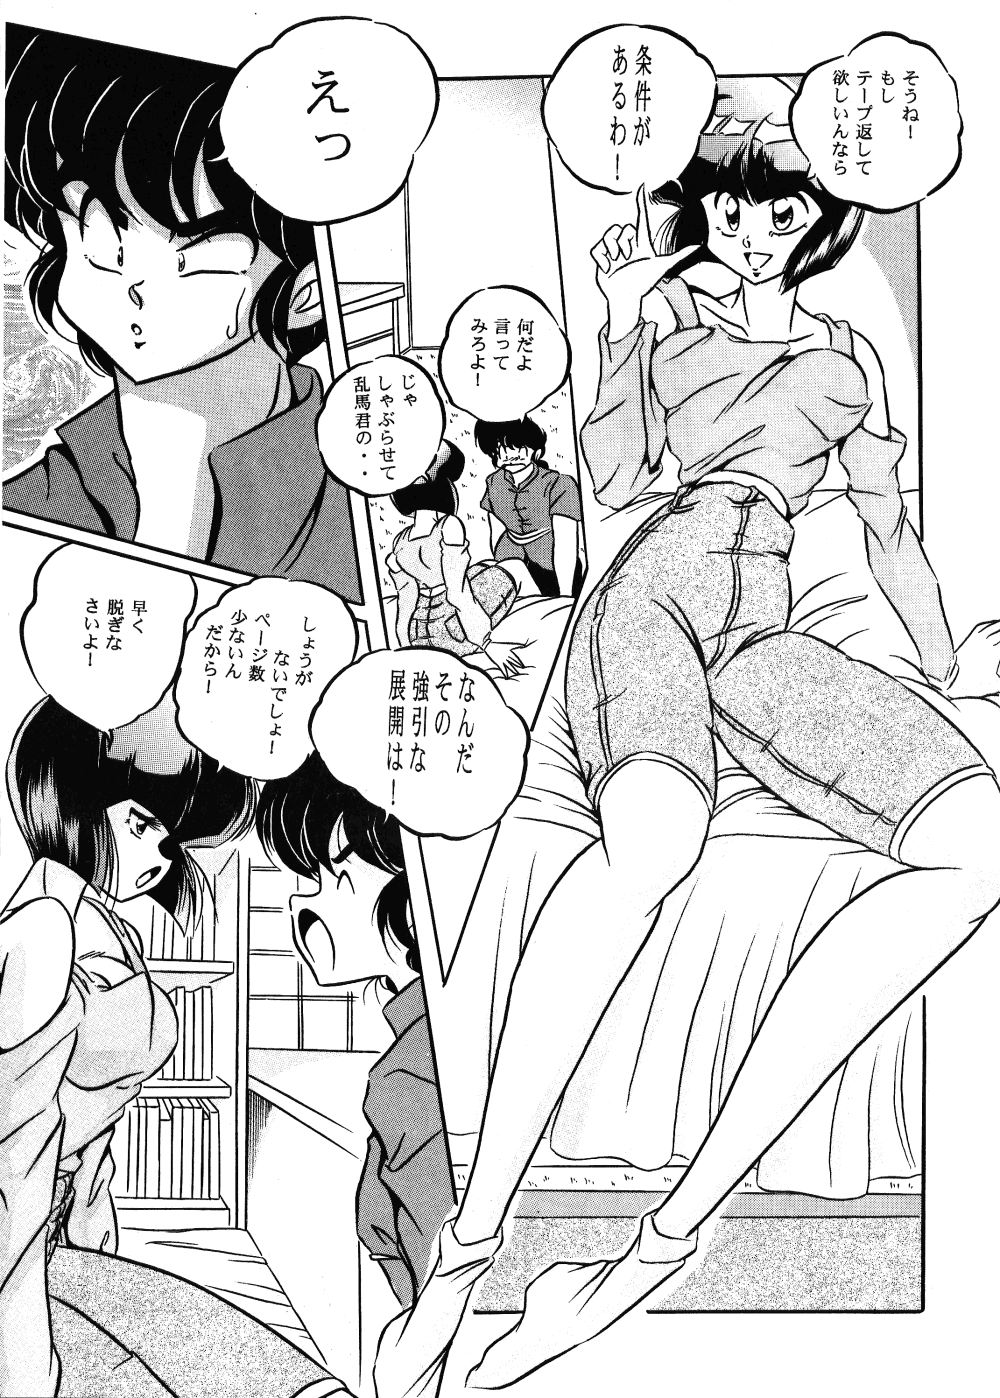 [C-Company] C-COMPANY SPECIAL STAGE 15 (Darkstalkers, Ranma 1/2) page 8 full